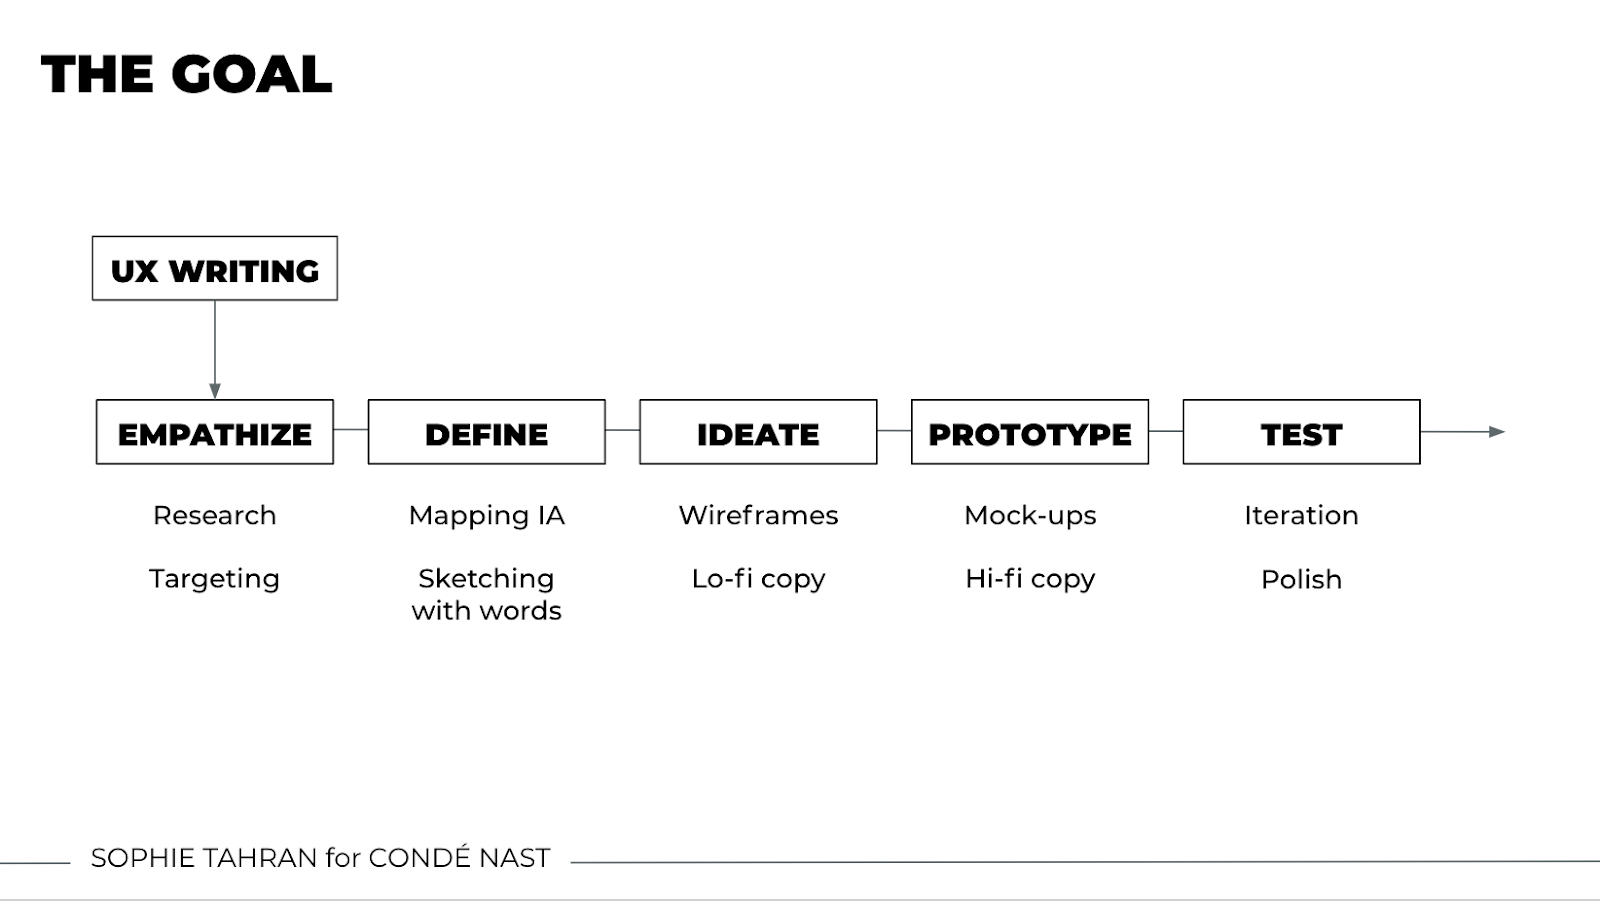 The design process when UX writing is implemented at every stage of the design process, as illustrated by Sophie Tahran for her interview at Condé Nast.